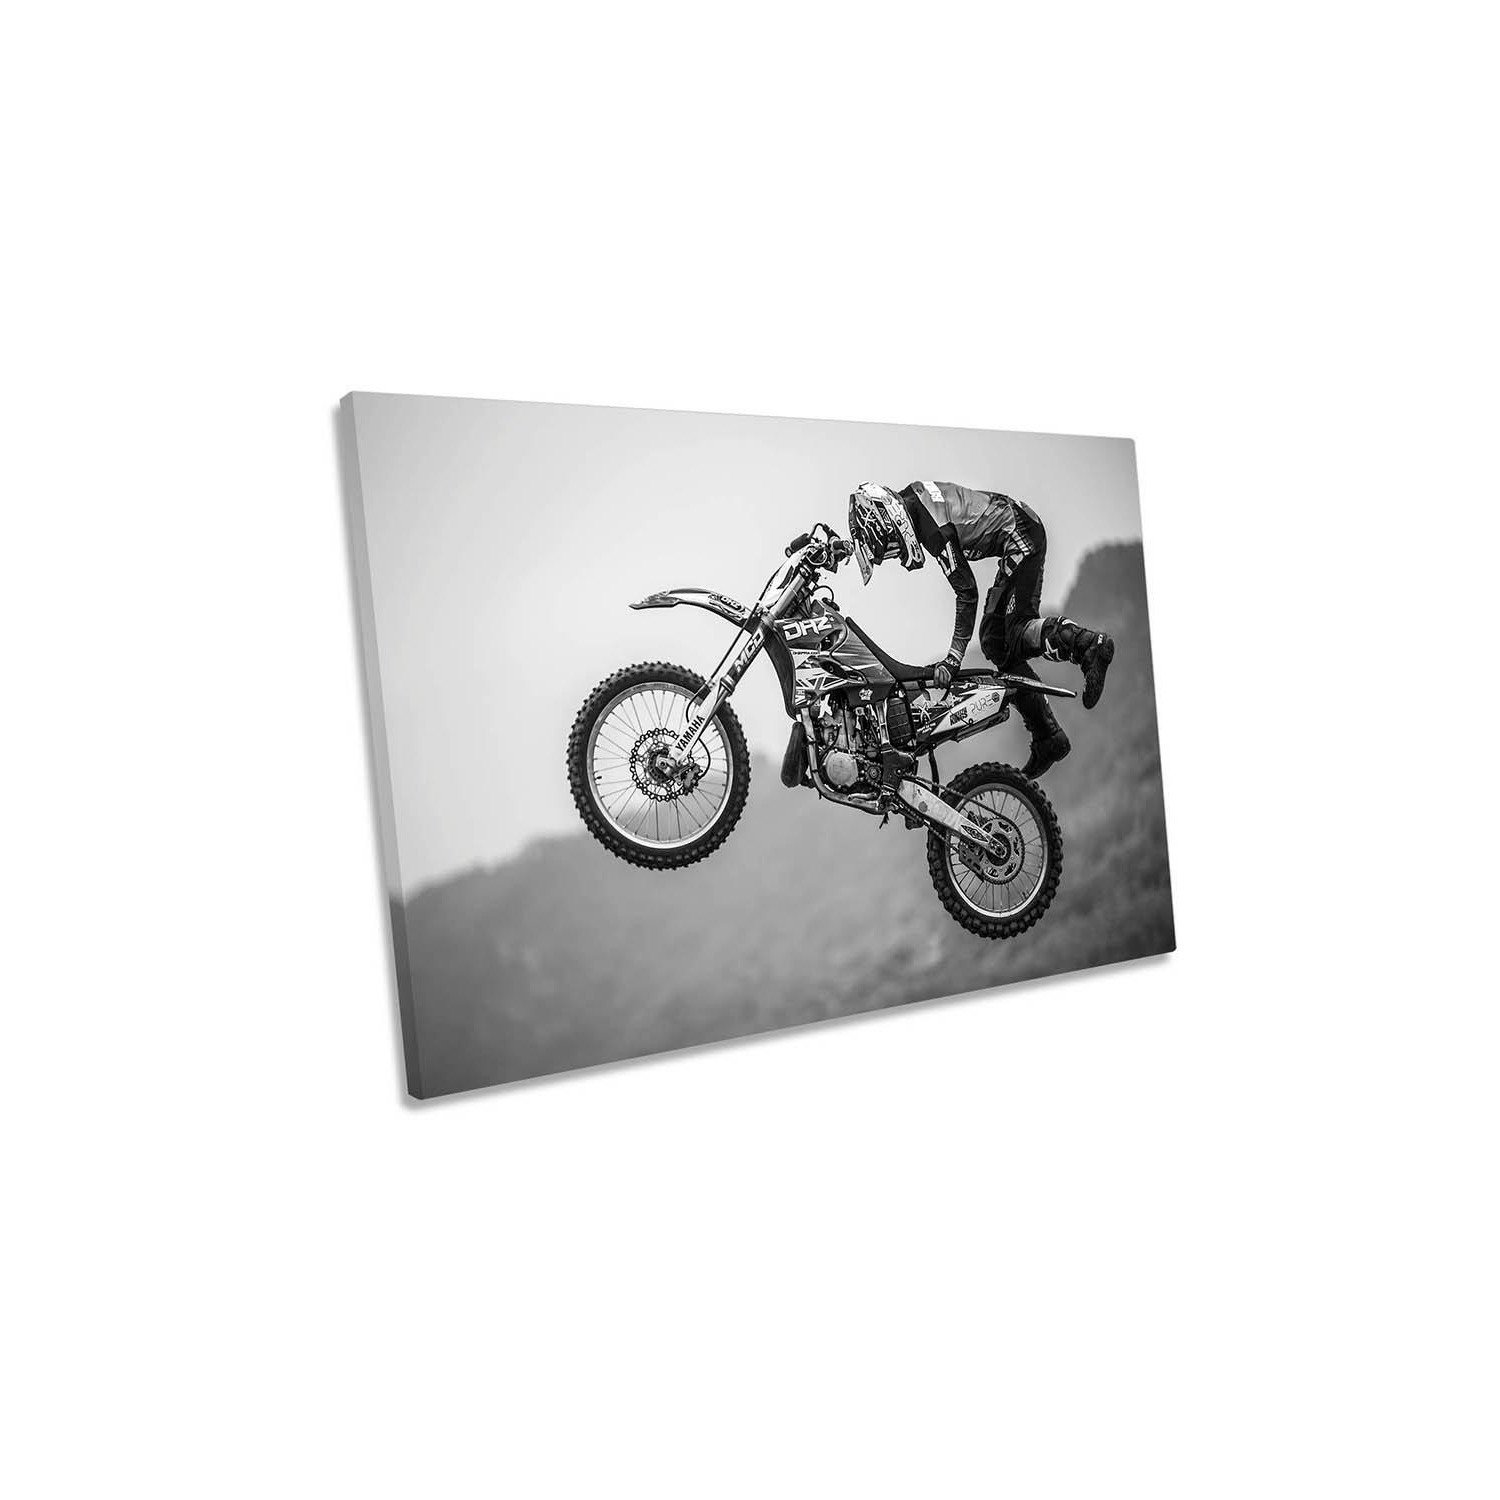 Battle of Transcendence Motor Bike Sports Canvas Wall Art Picture Print - image 1